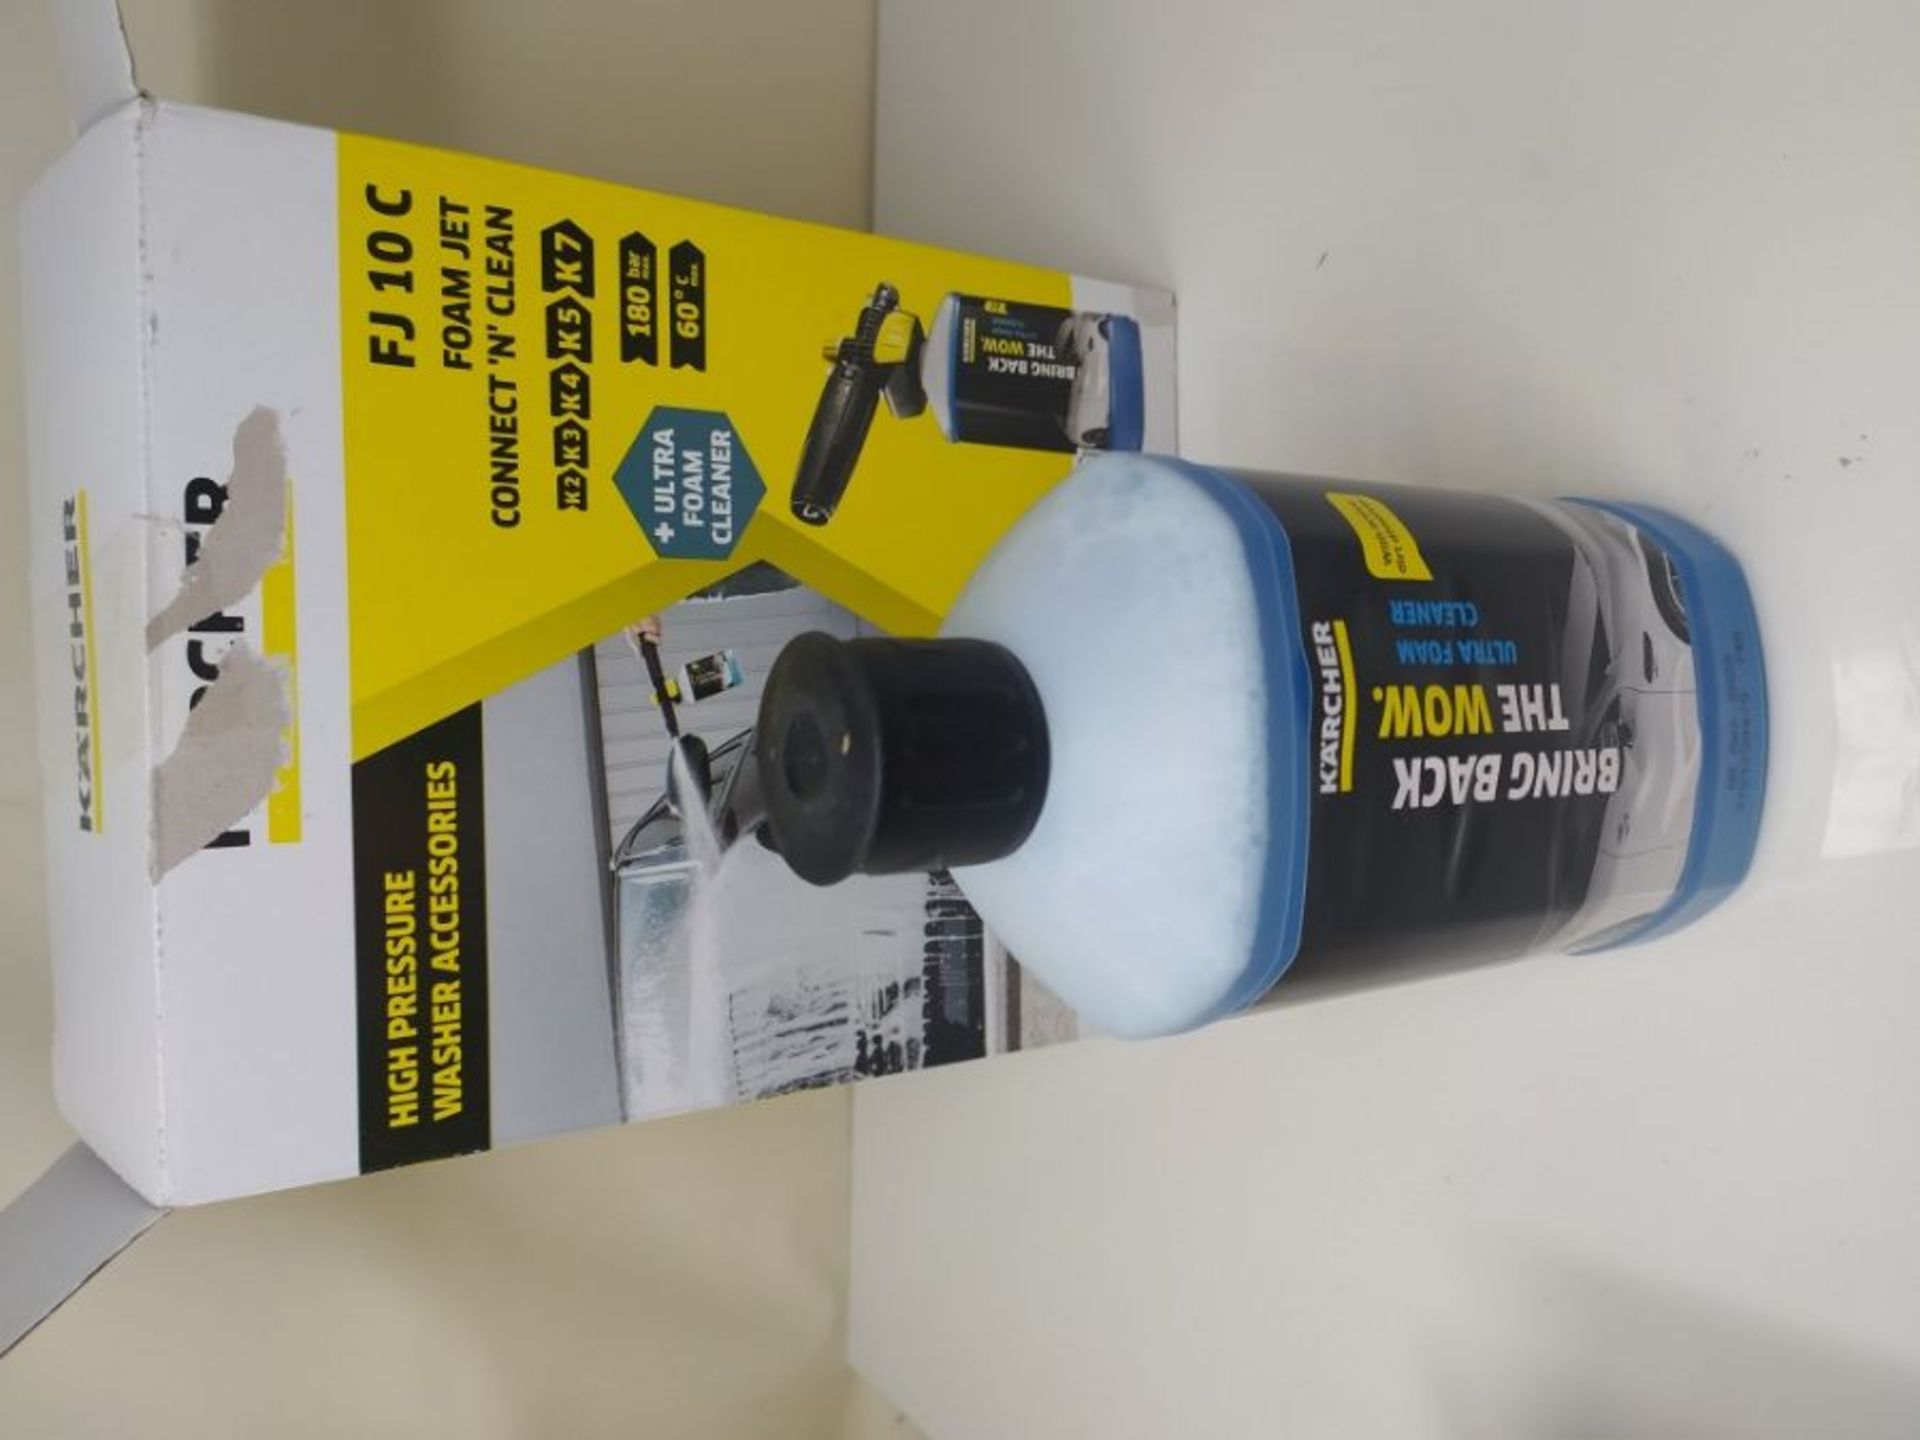 Karcher FJ10 Foam Nozzle with Ultra Pressure Washer Detergent - Image 2 of 2